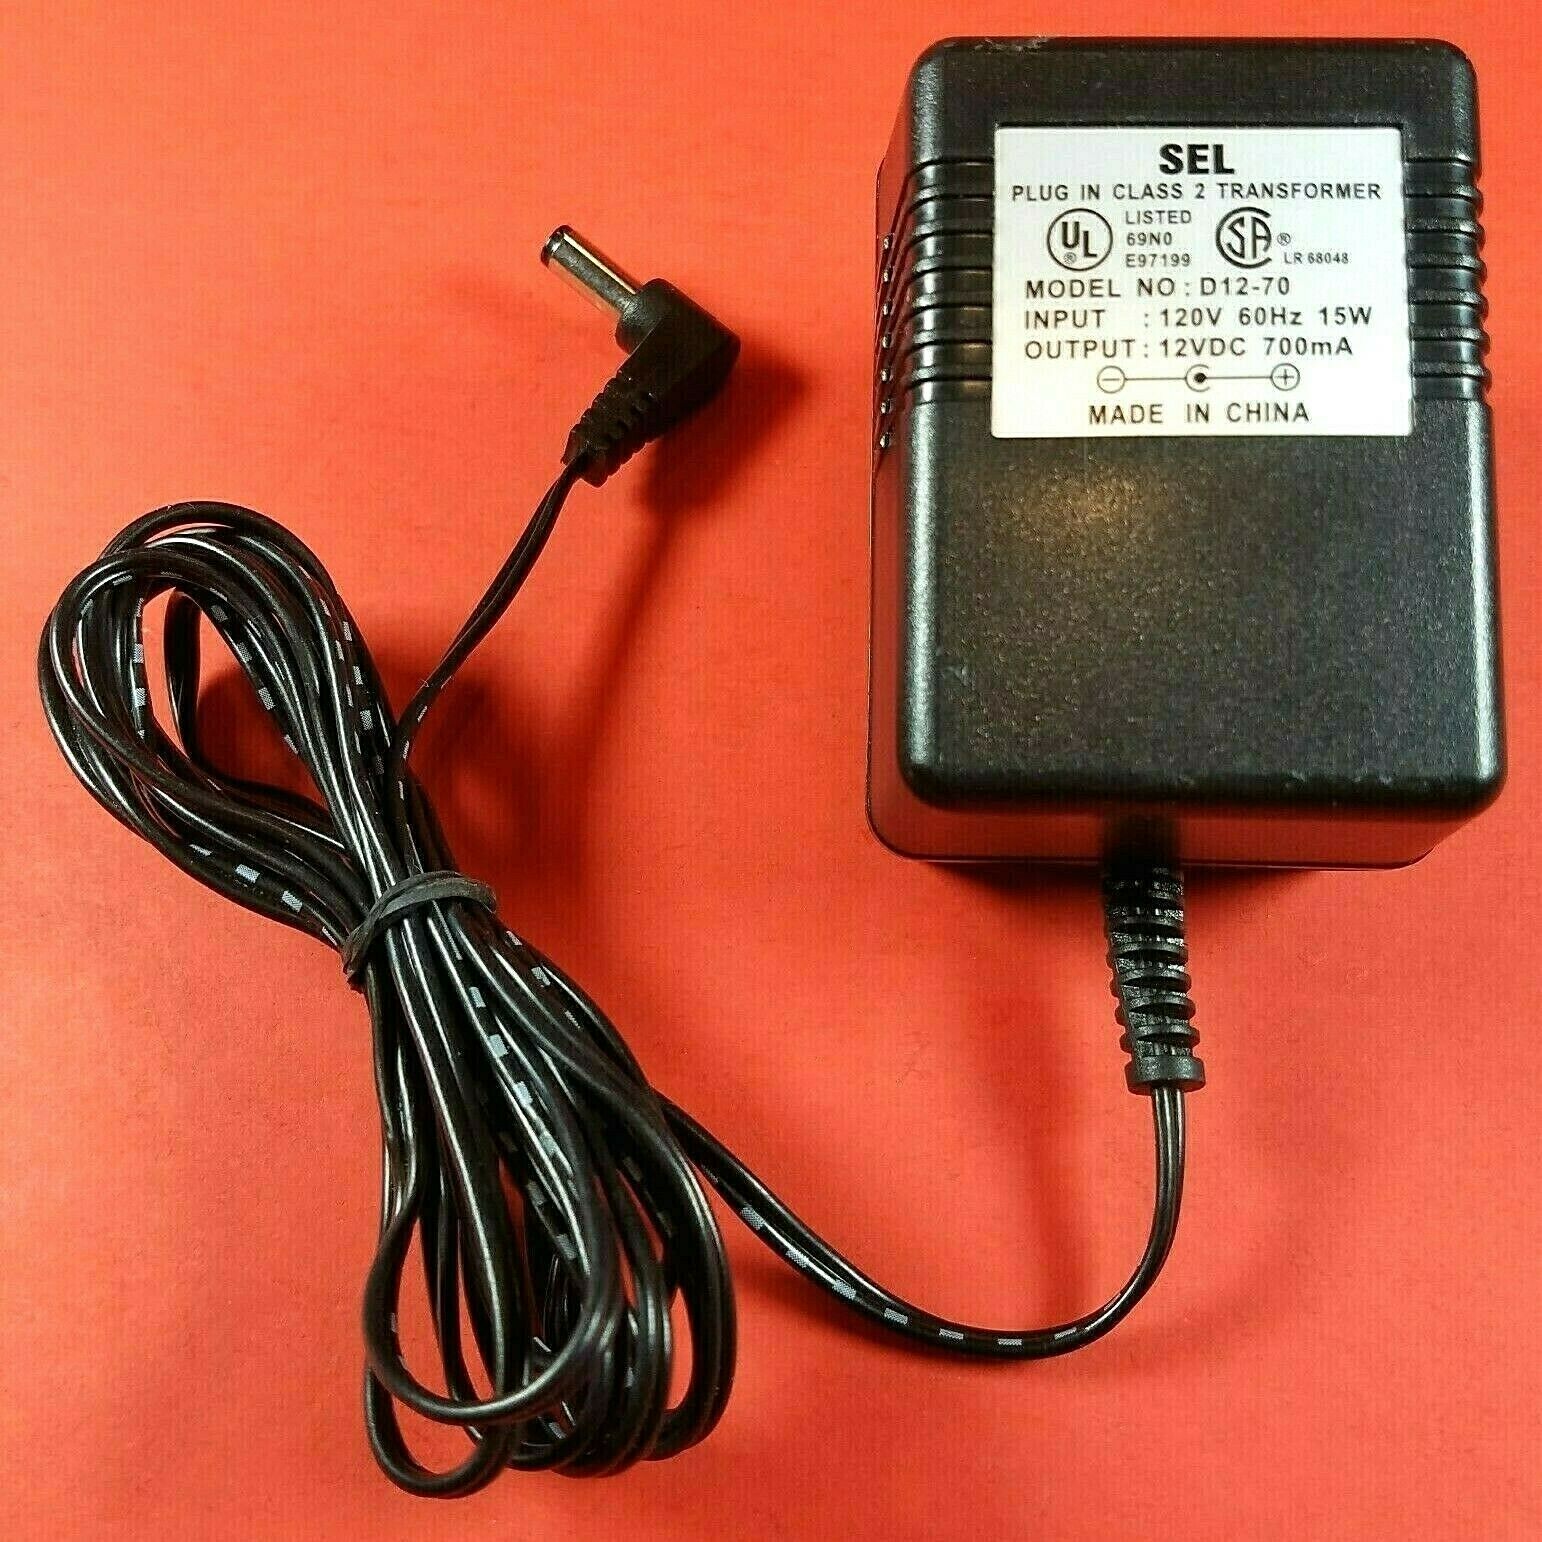 Genuine SEL D12-70 Power Supply Adaptor 12V - 700mA OEM AC/DC Adapter Charger SEL Plug In Class 2 Transformer Model N - Click Image to Close